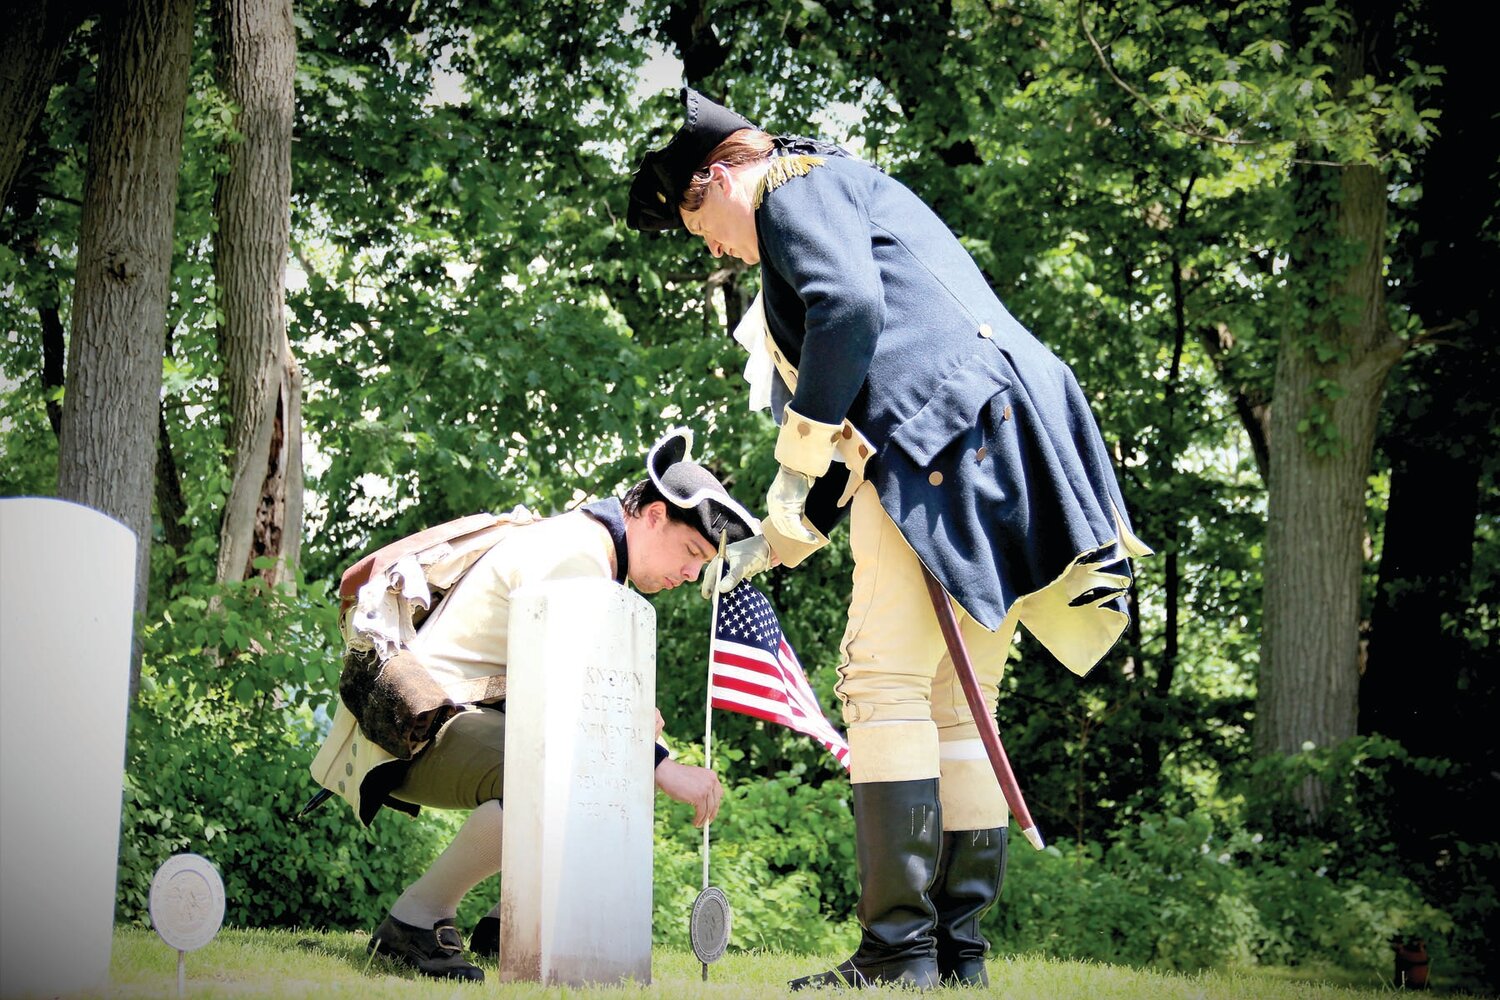 Gen. George Washington, portrayed by John Godzieba, right, helps place a flag at a gravesite  near the Thompson-Neely House in Washington Crossing.